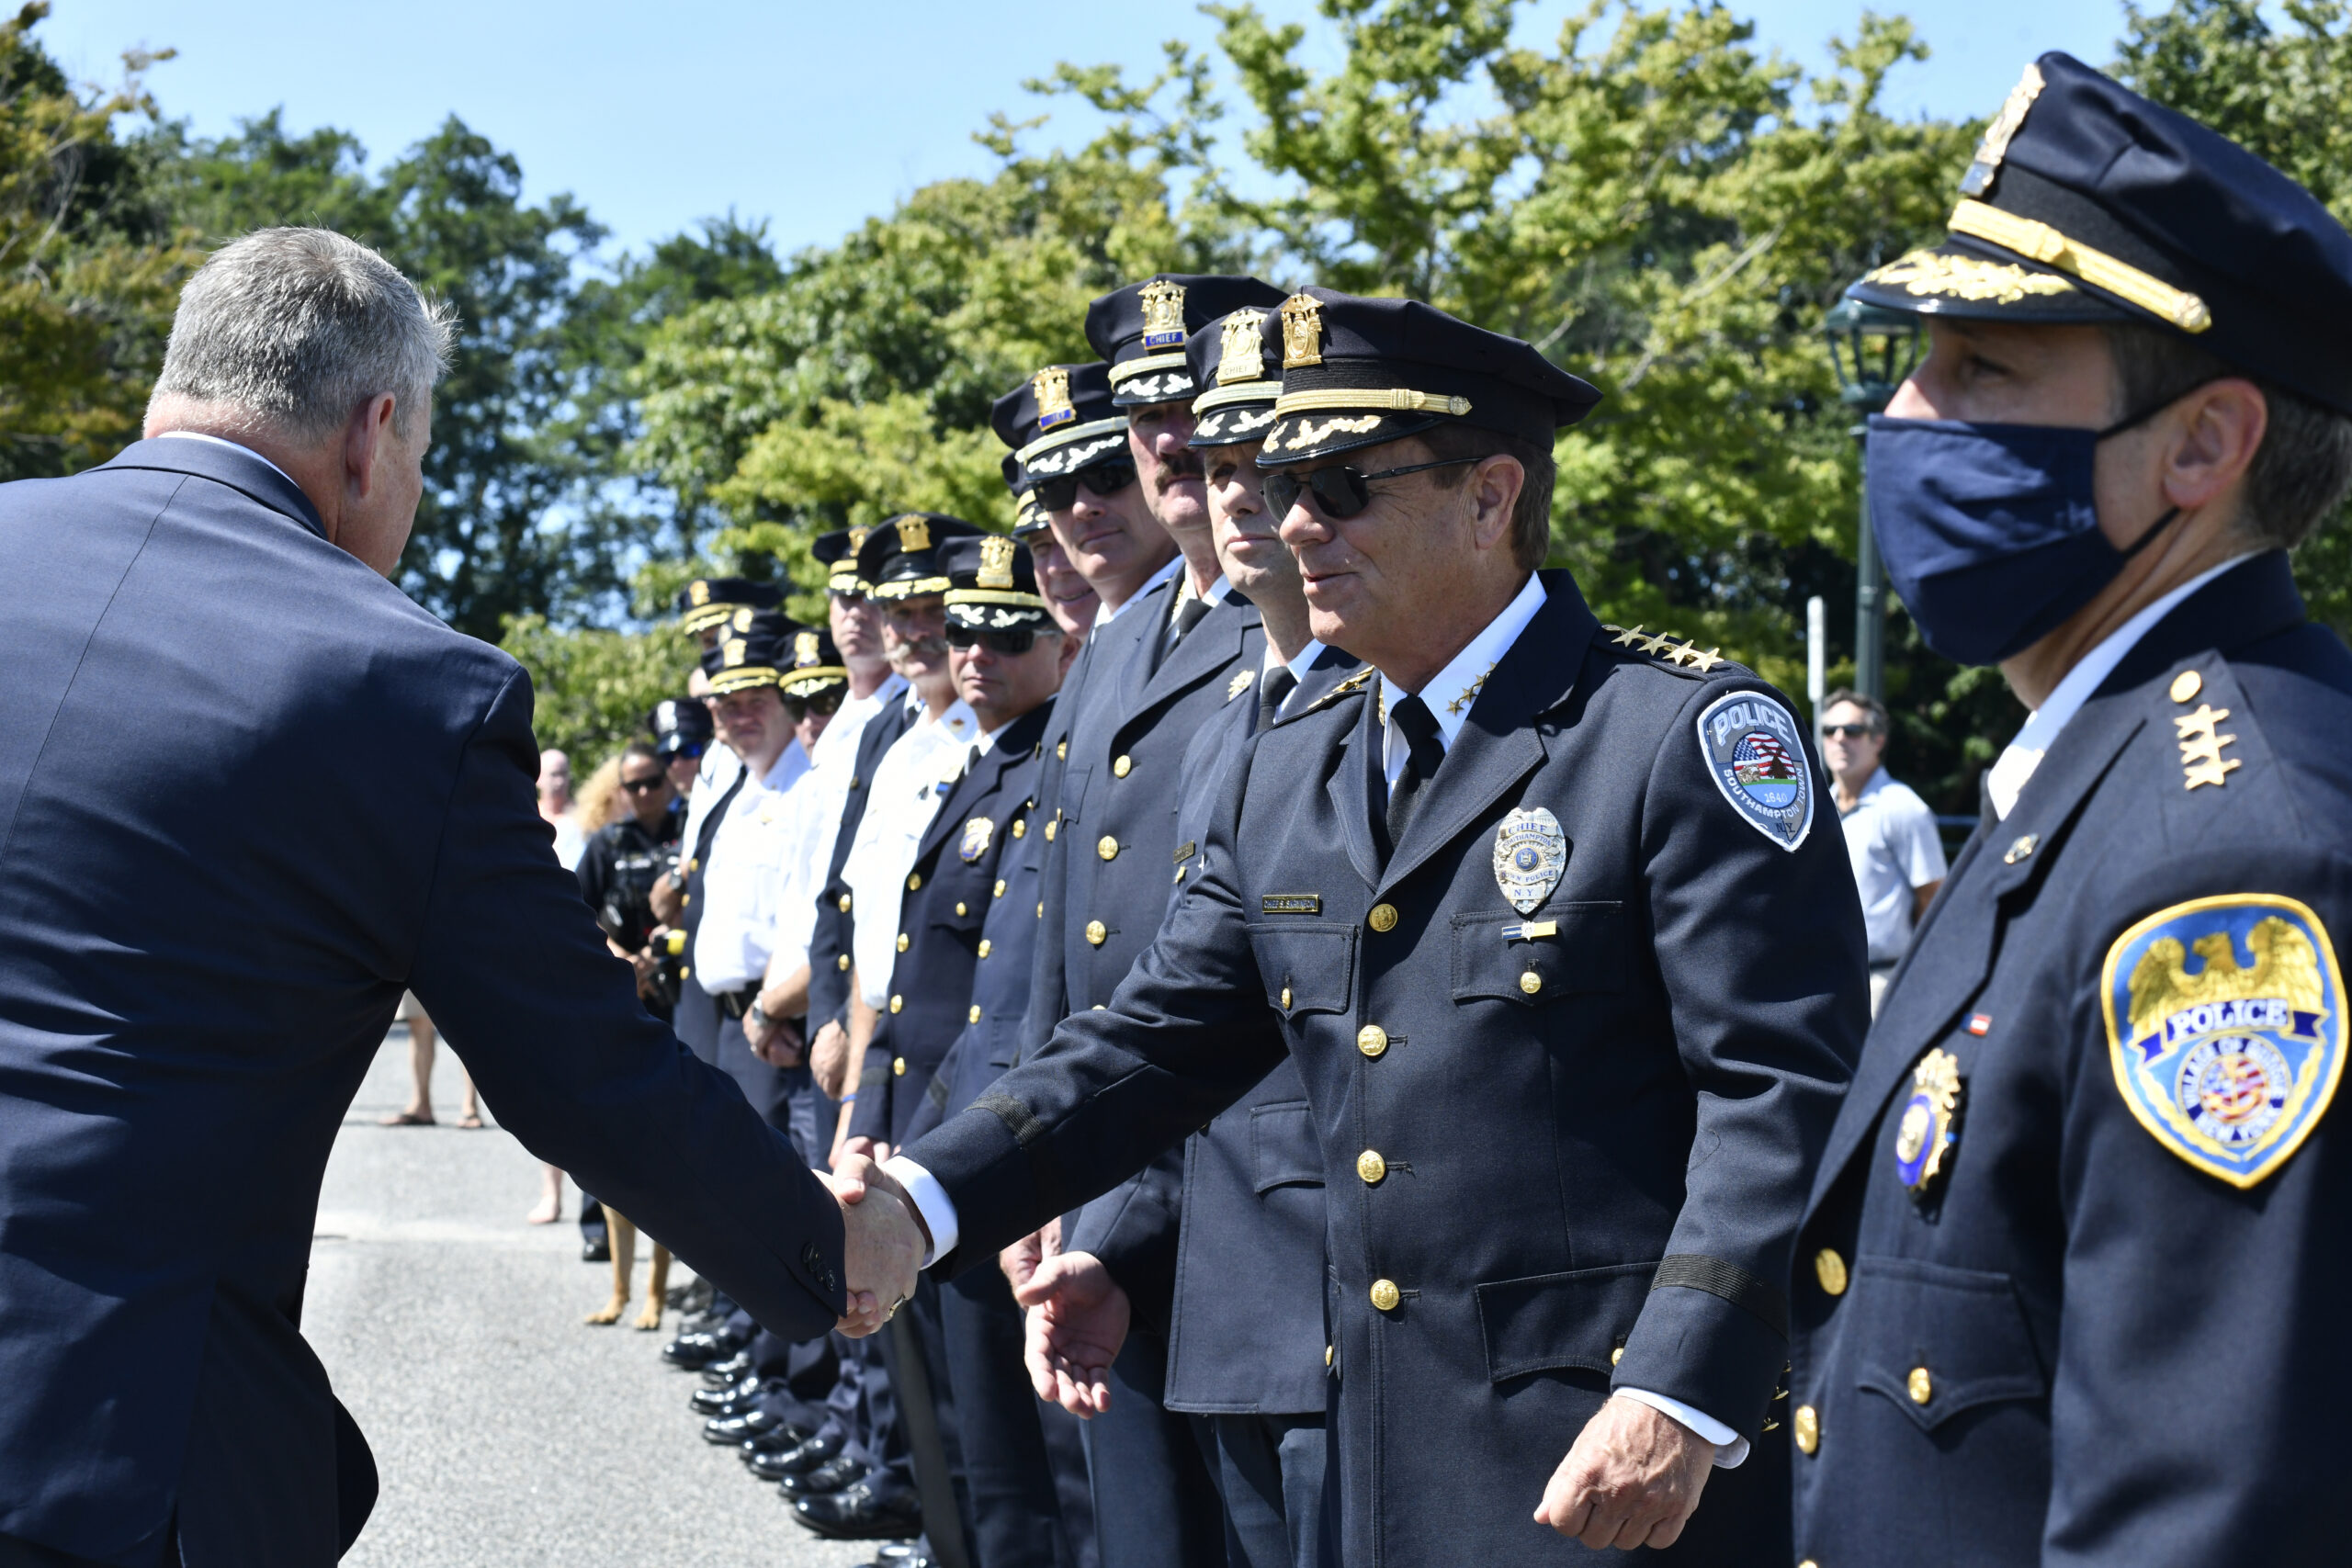 Southampton Town Police Chief Police Chief Steven Skrynecki at the walk-out for the retirement of Southampton Village Chief Thomas Cummings in 2021.    DANA SHAW